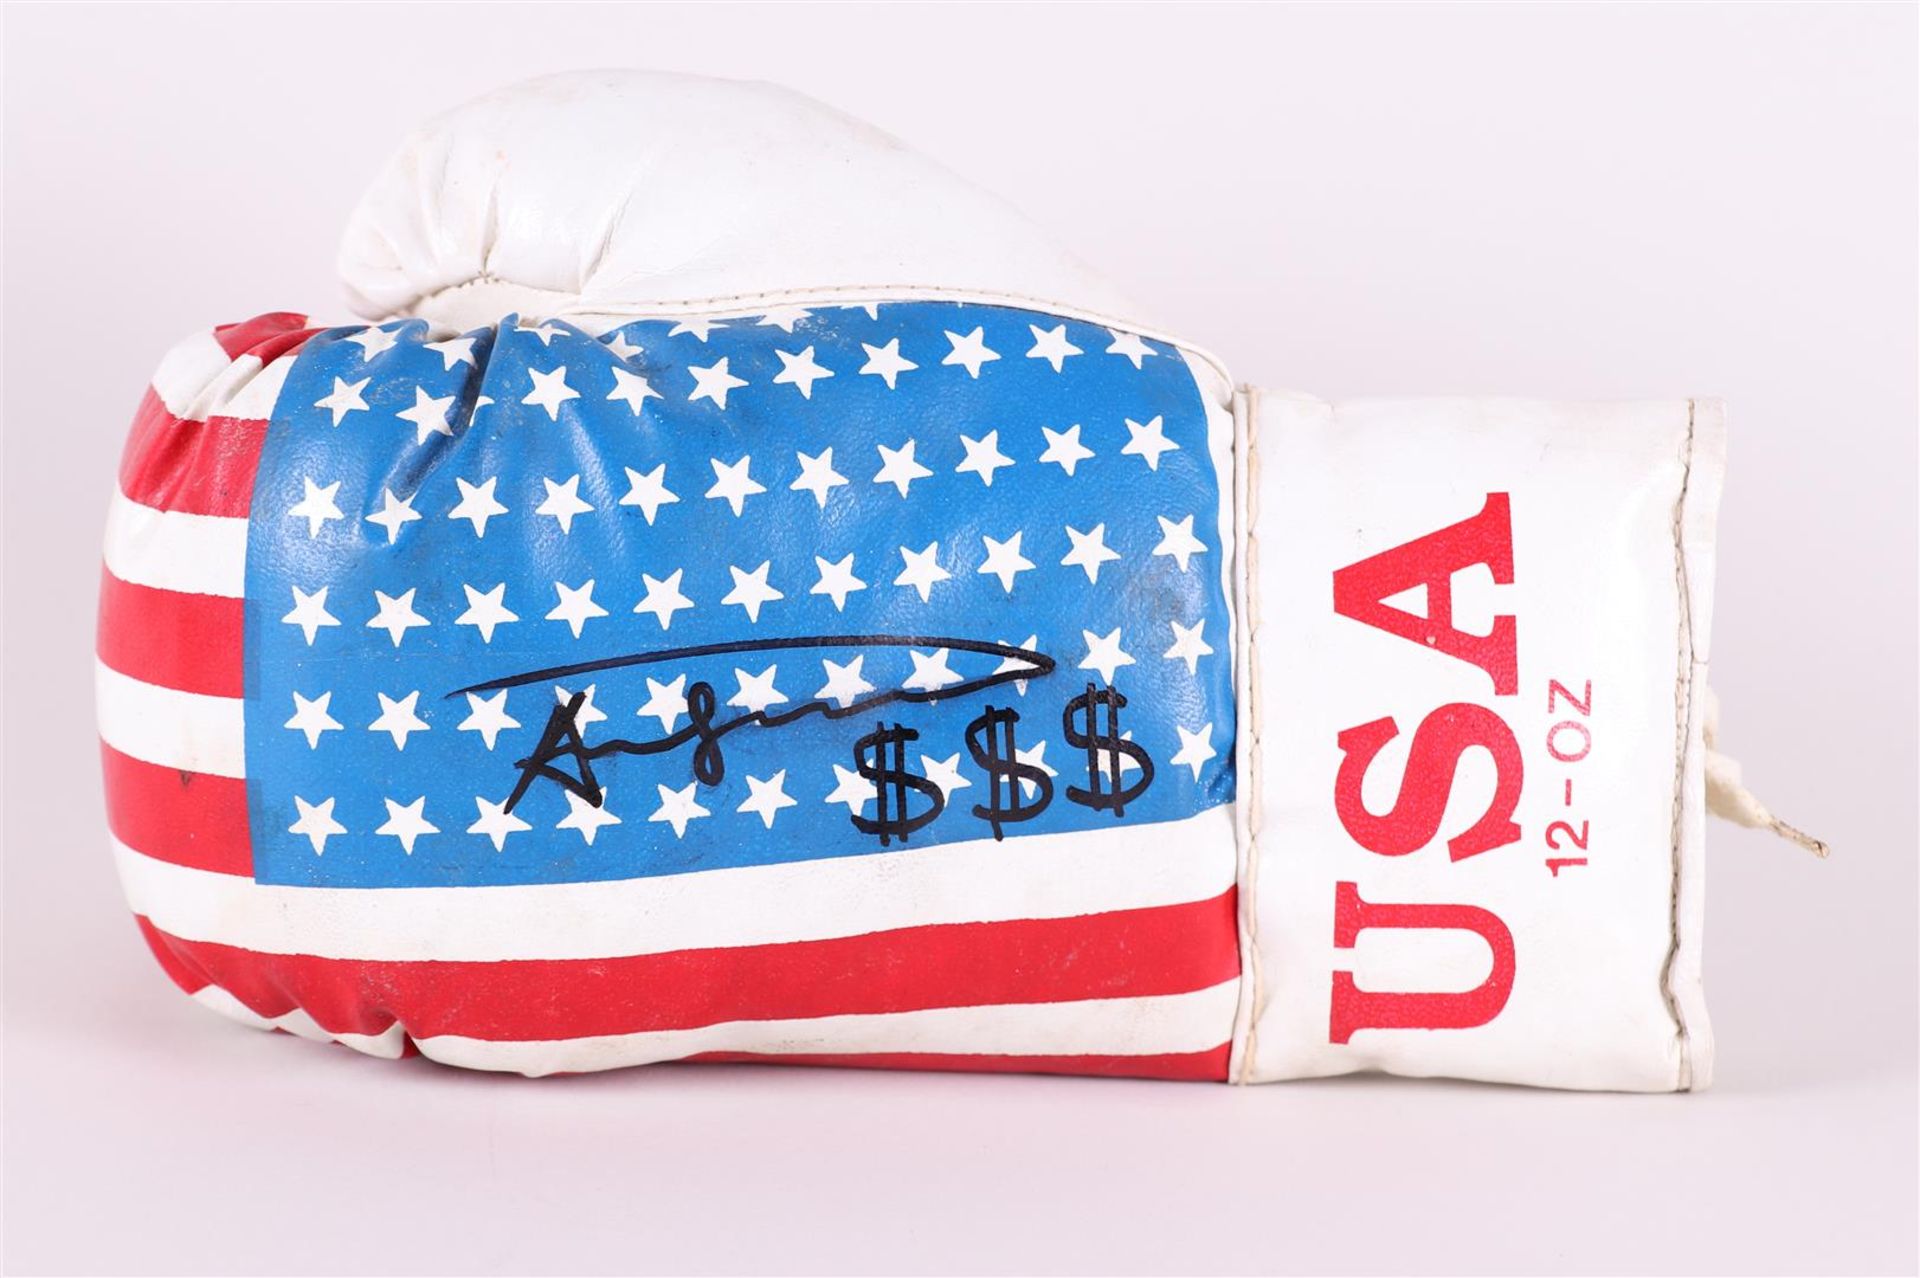 Andy Warhol (Pittsburg 1928 - 1987 New York), (after), Boxing glove with American flag